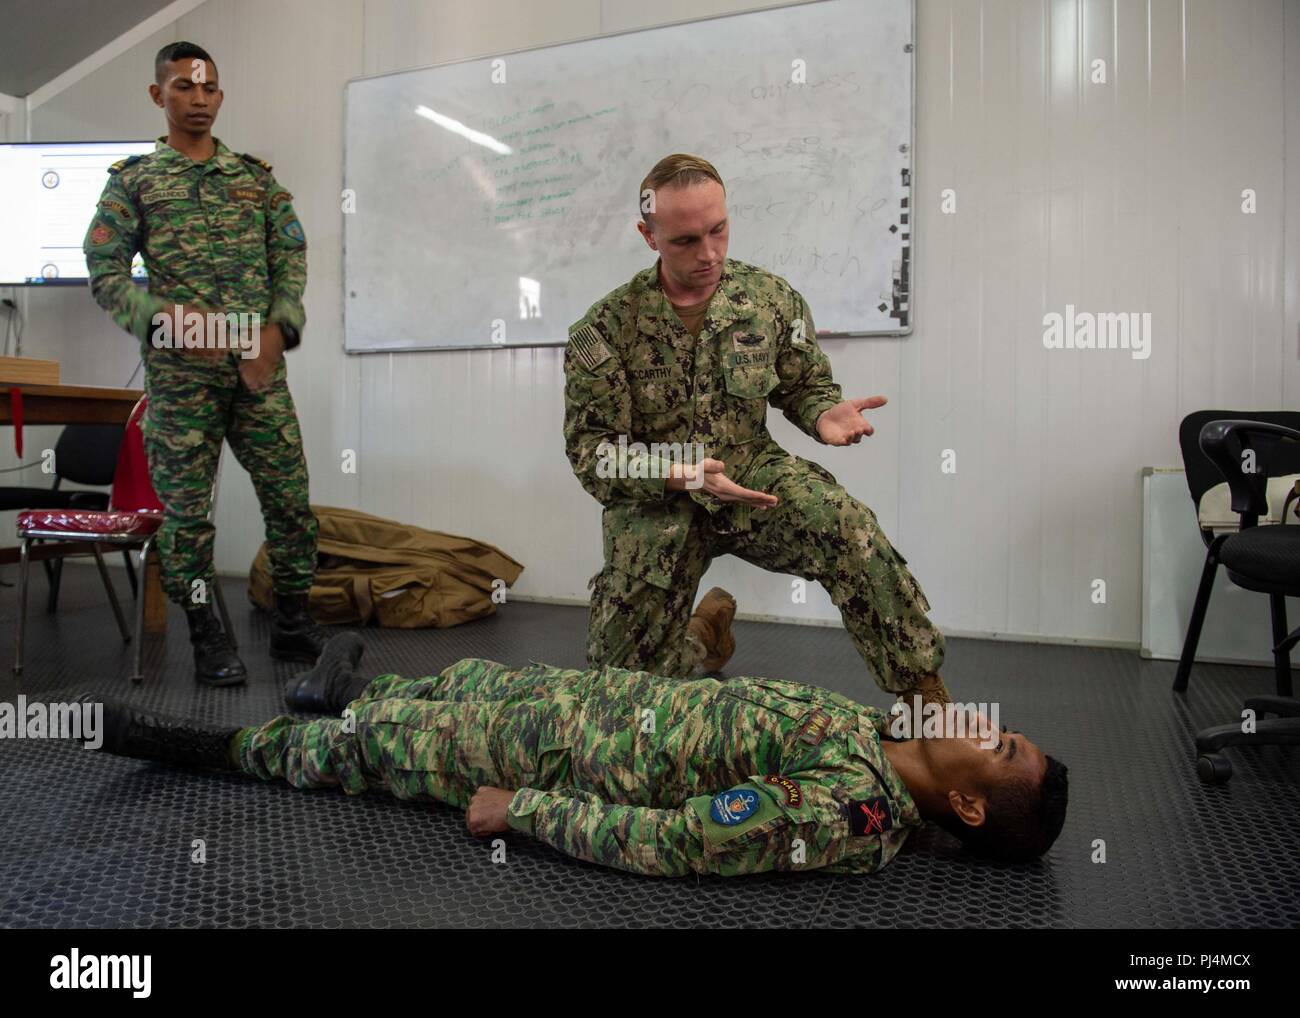 Hospital Corpsman 3rd Class Tom McCarthy, from McKinleyville, California, assigned to Naval Hospital Yokosuka, and members of the Timor-Leste Defense Force simulate checking for bleeding on a patient during CARAT Timor-Leste 2018 at Hera Naval Base, Aug. 29, 2018. CARAT Timor-Leste 2018 is designed to address shared maritime security concerns, build relationships and enhance interoperability among participating forces. (U.S. Navy photo by Mass Communication Specialist 3rd Class Danny Ray Nuñez Jr./Released) Stock Photo